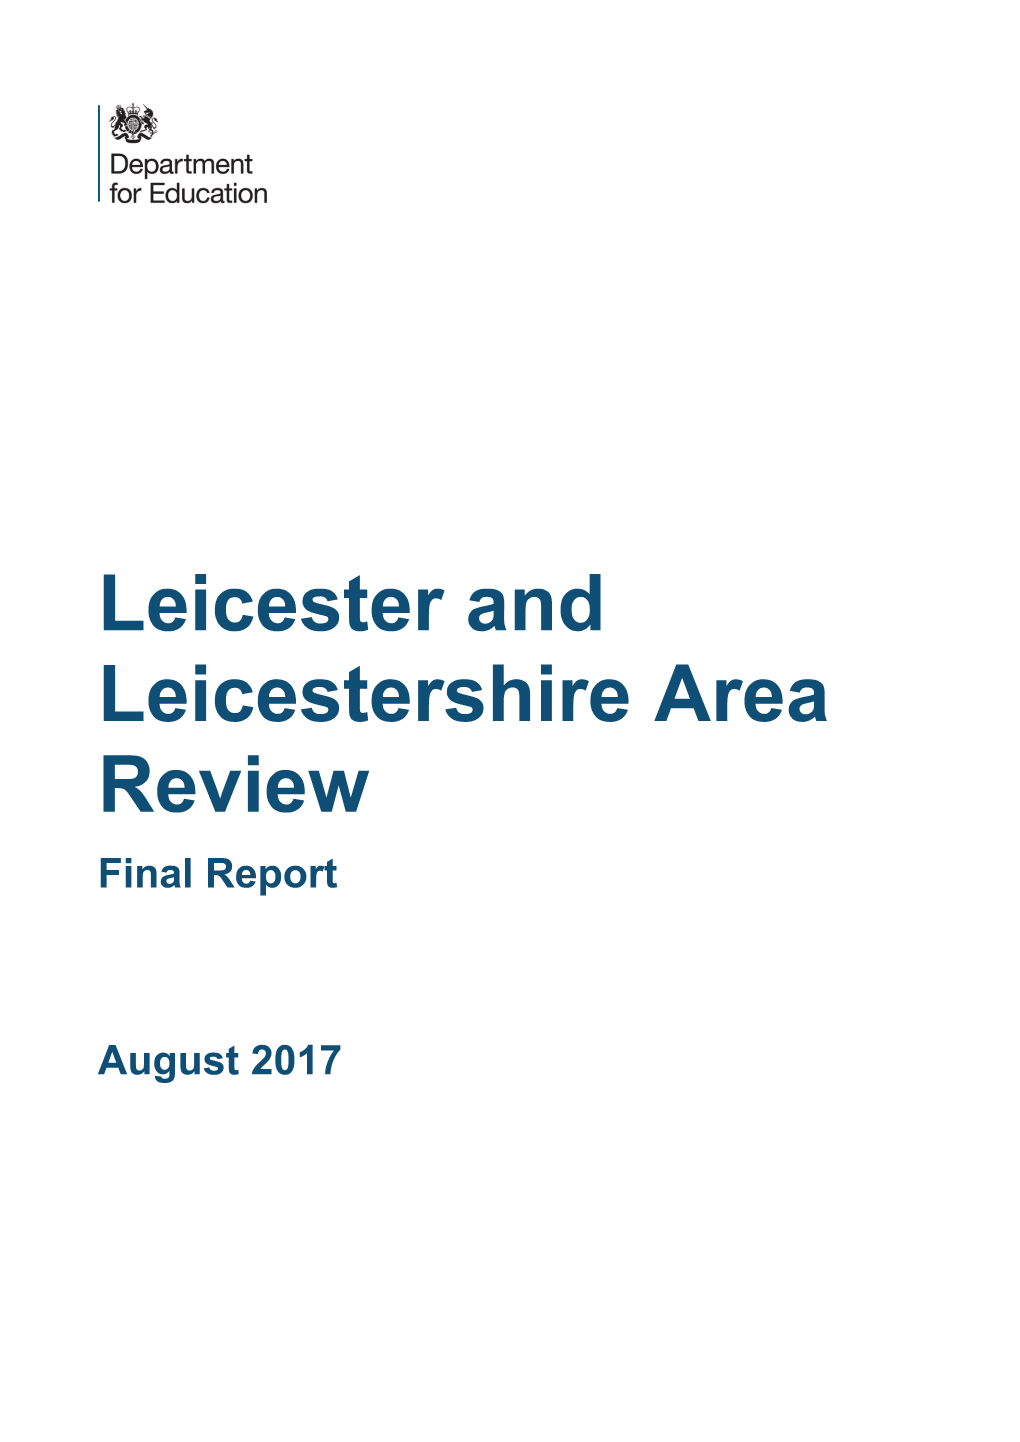 Leicester and Leicestershire Area Review Final Report